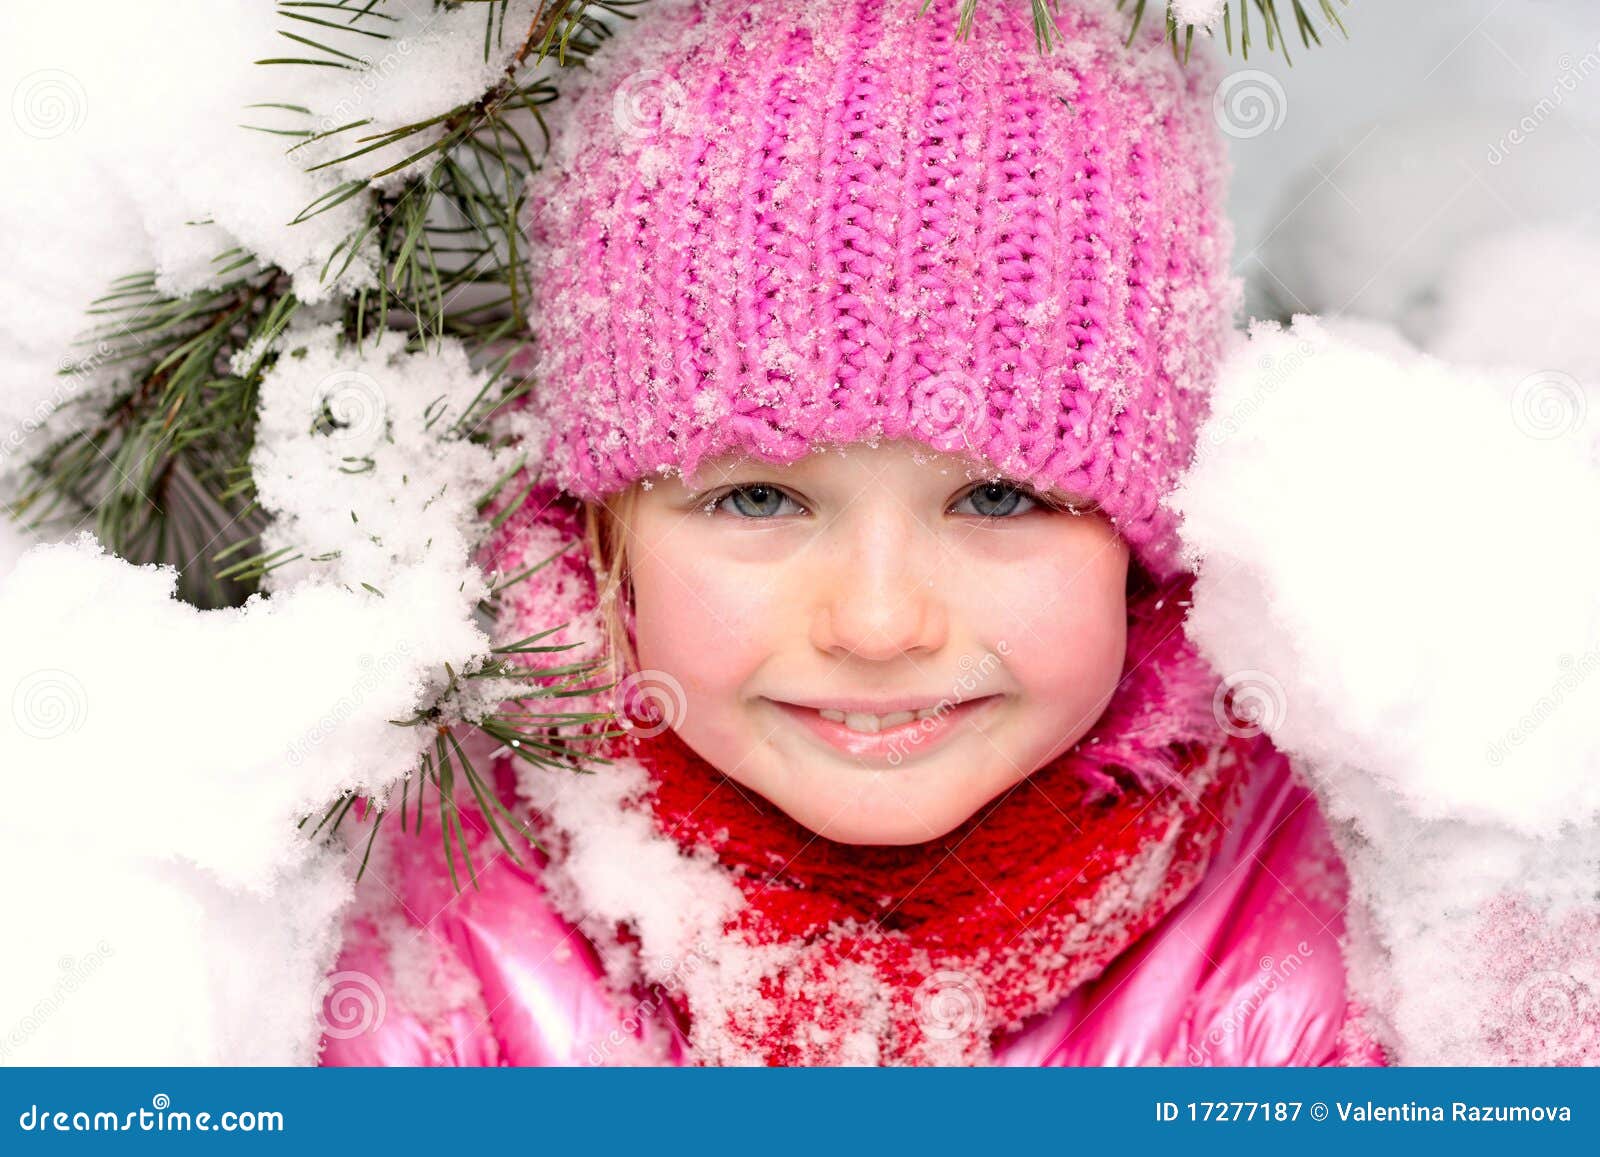 Little girl in snow . stock image. Image of female, holiday - 17277187